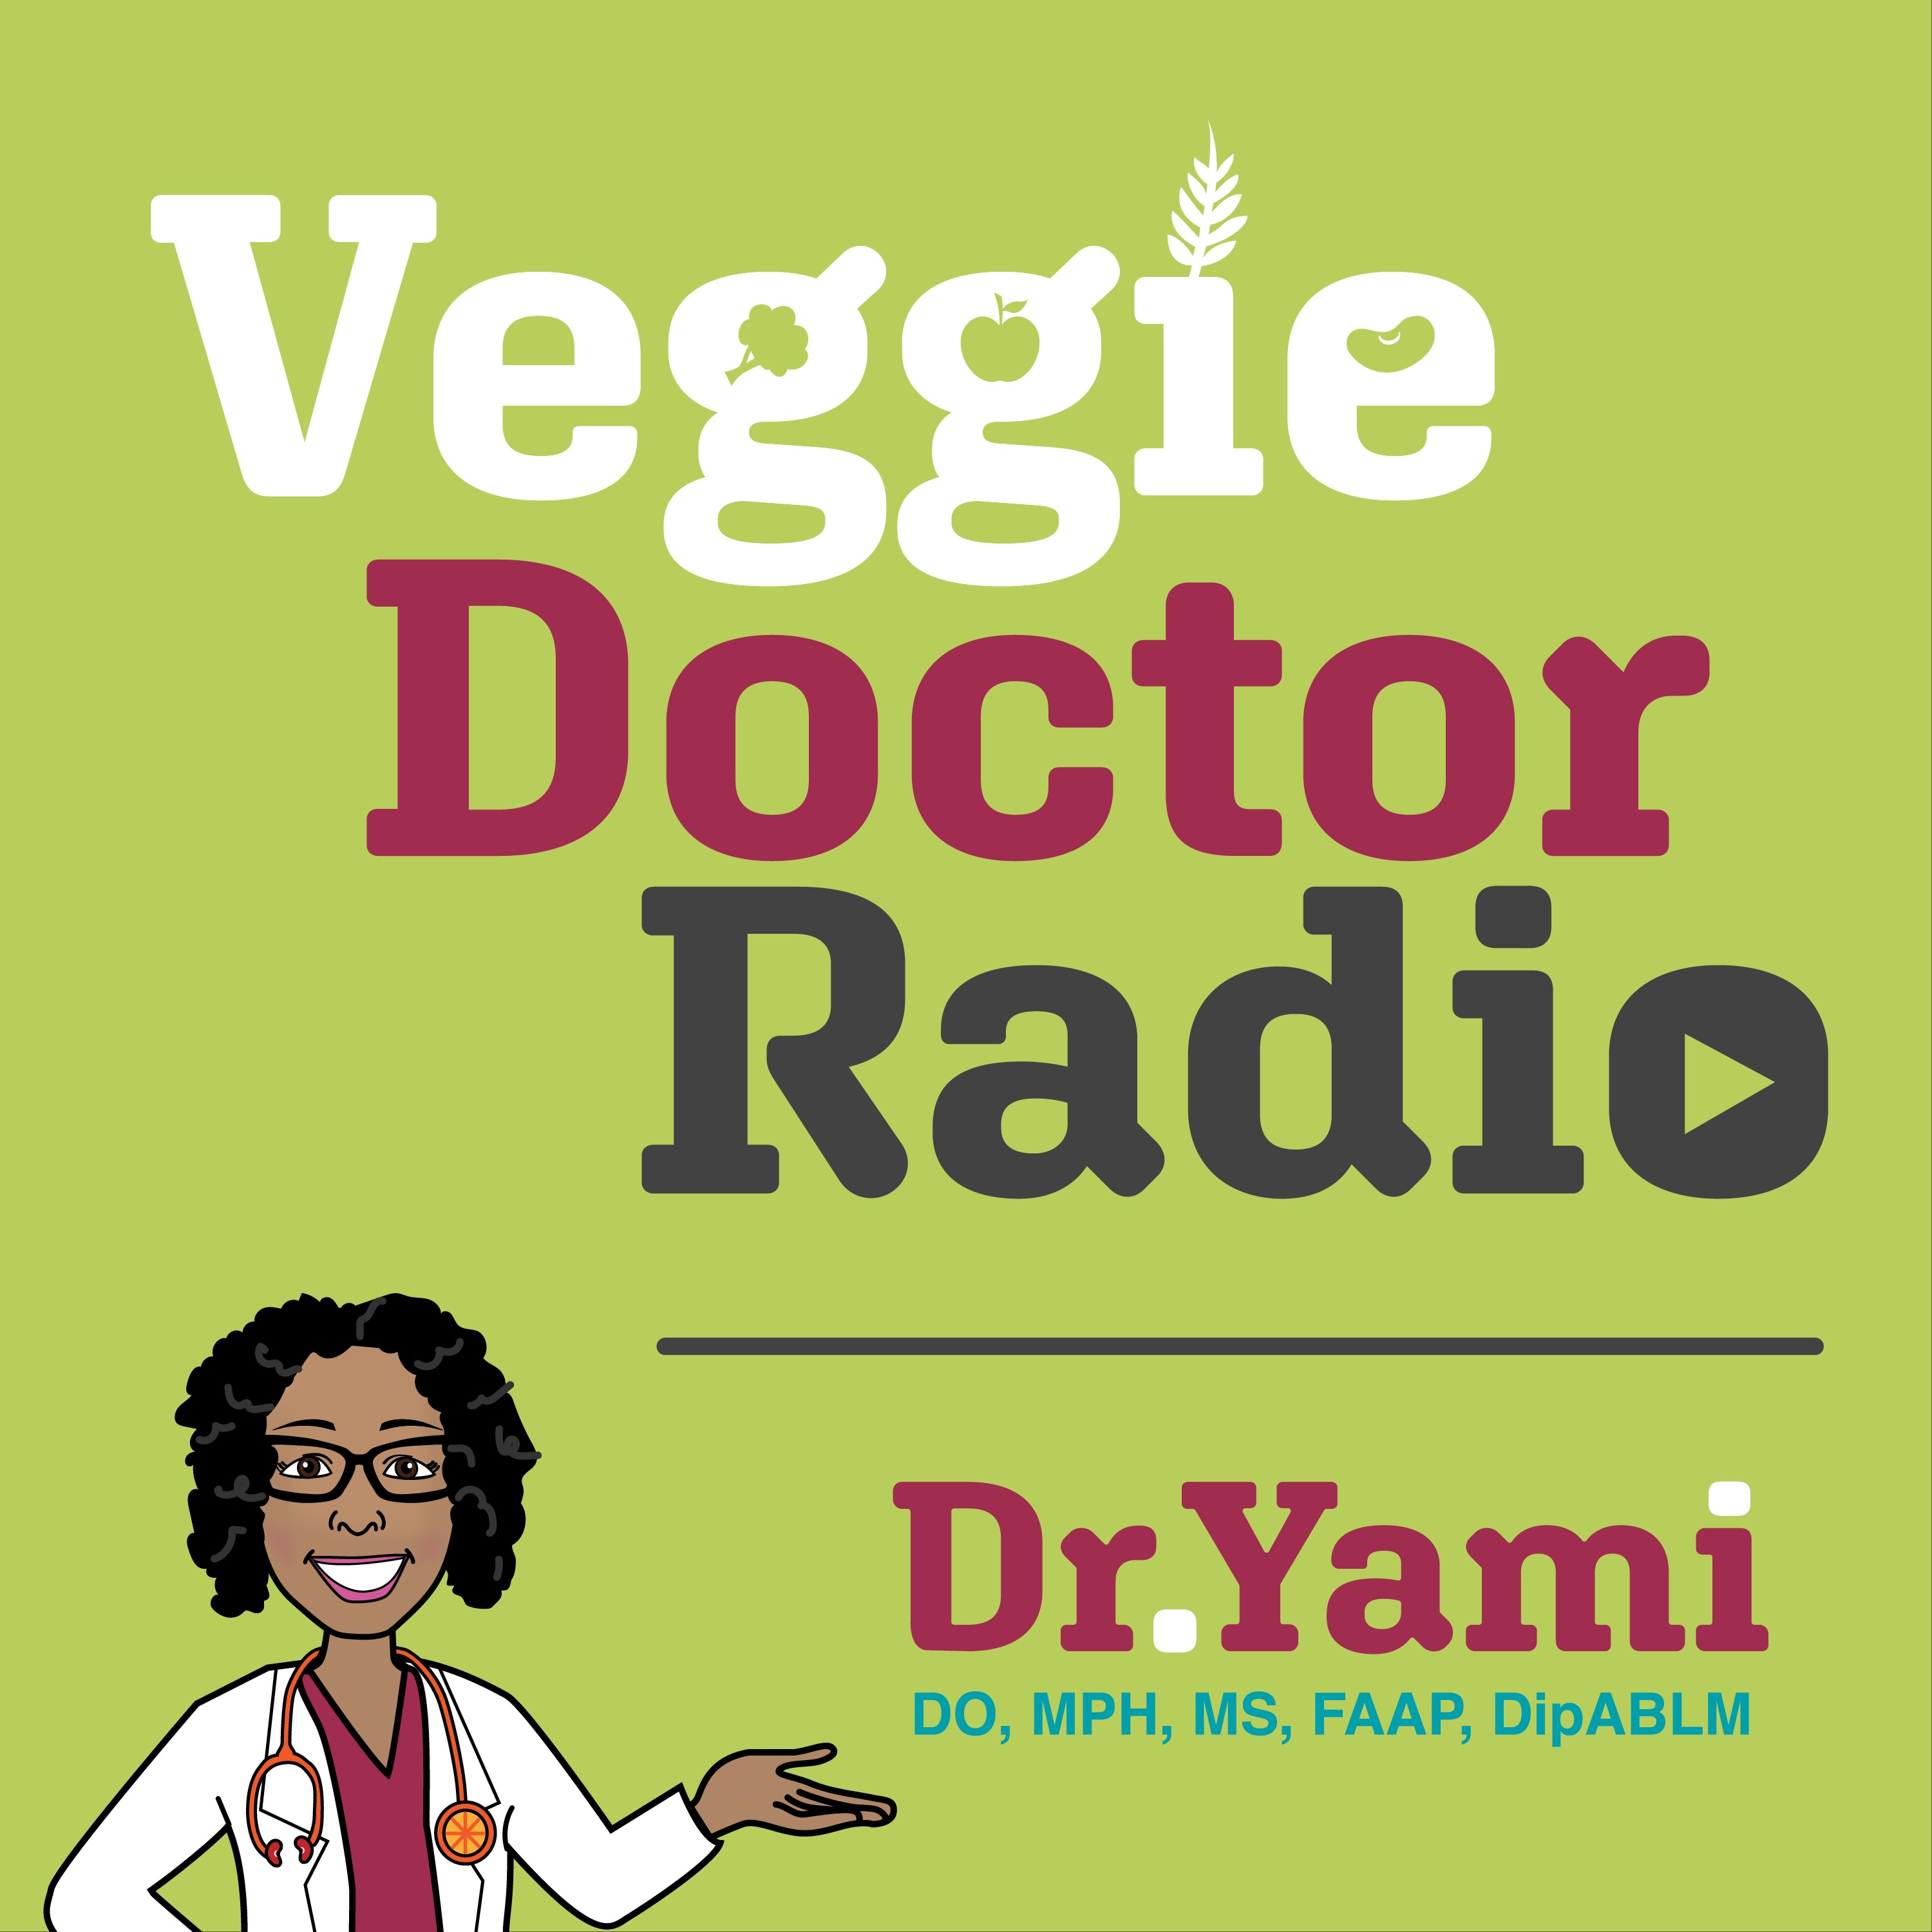 150: Exploring Food Addiction, Shame and Transformation with Chuck Carroll (Veggie Doctor Radio)